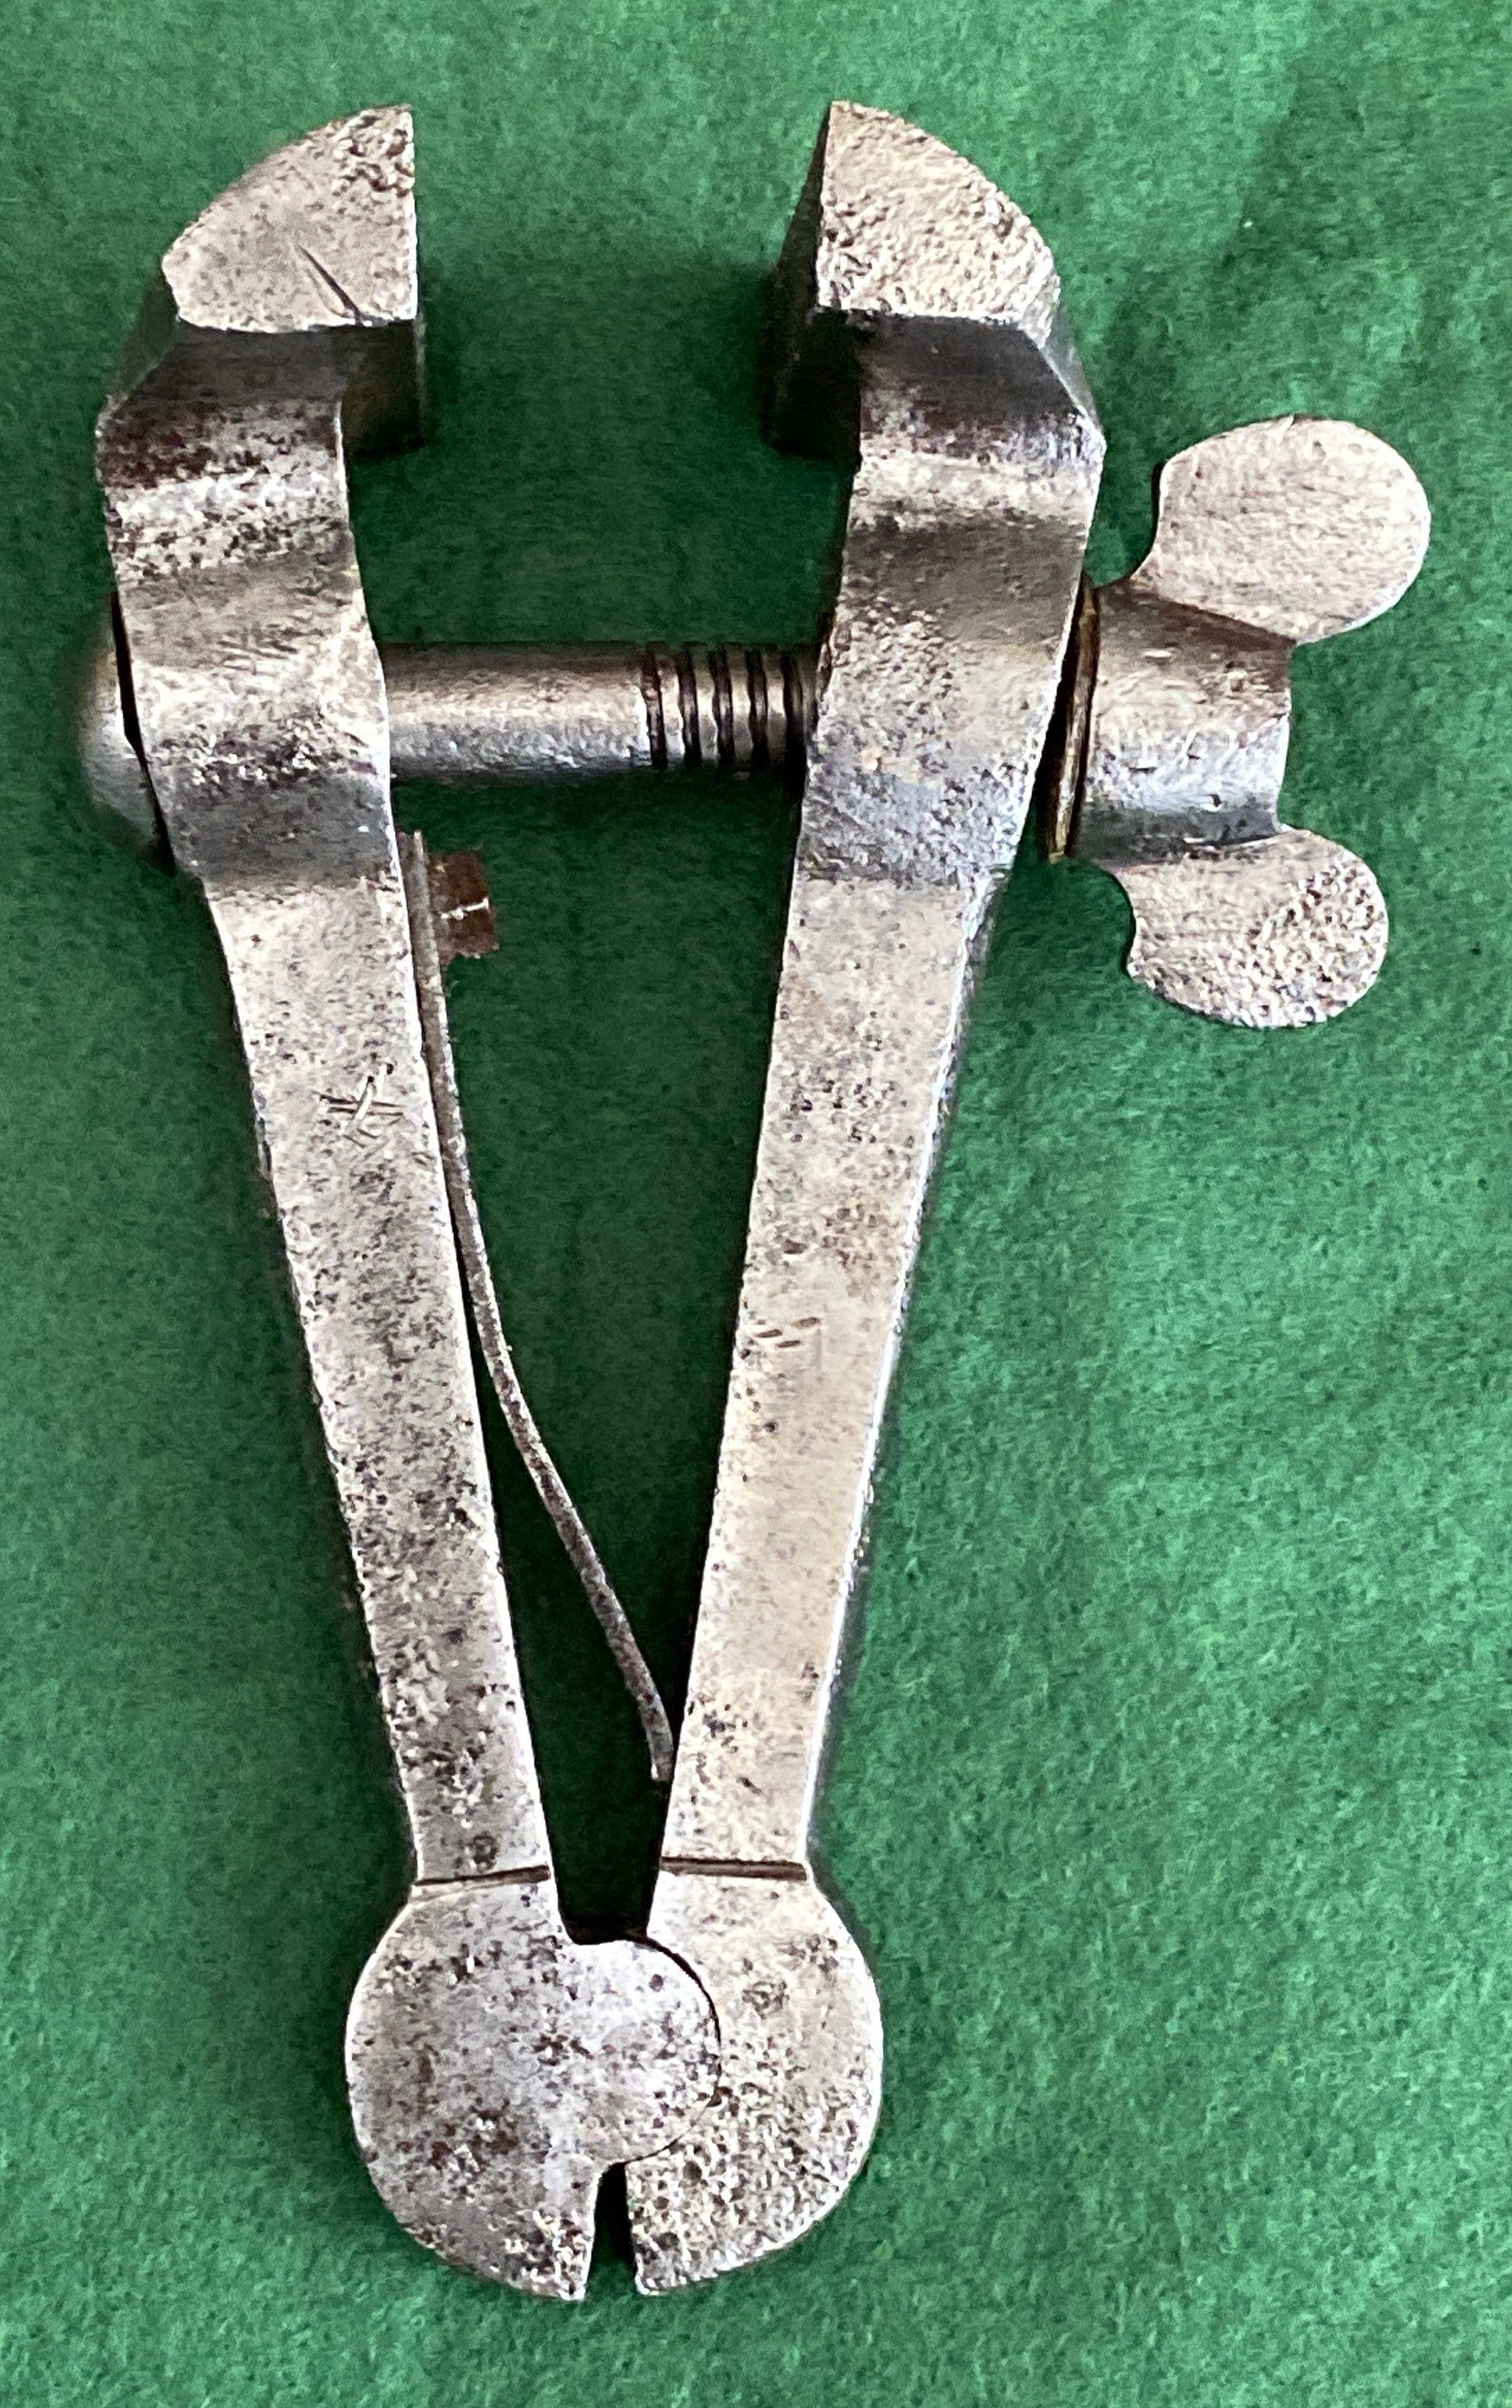 A Good Vintage Hobby Hand Drill. Vintage, Small, Hand Drill by HY Squire &  Sons Ltd. Small Hand Drill for Jewellery or Small Hobbies/crafts. 